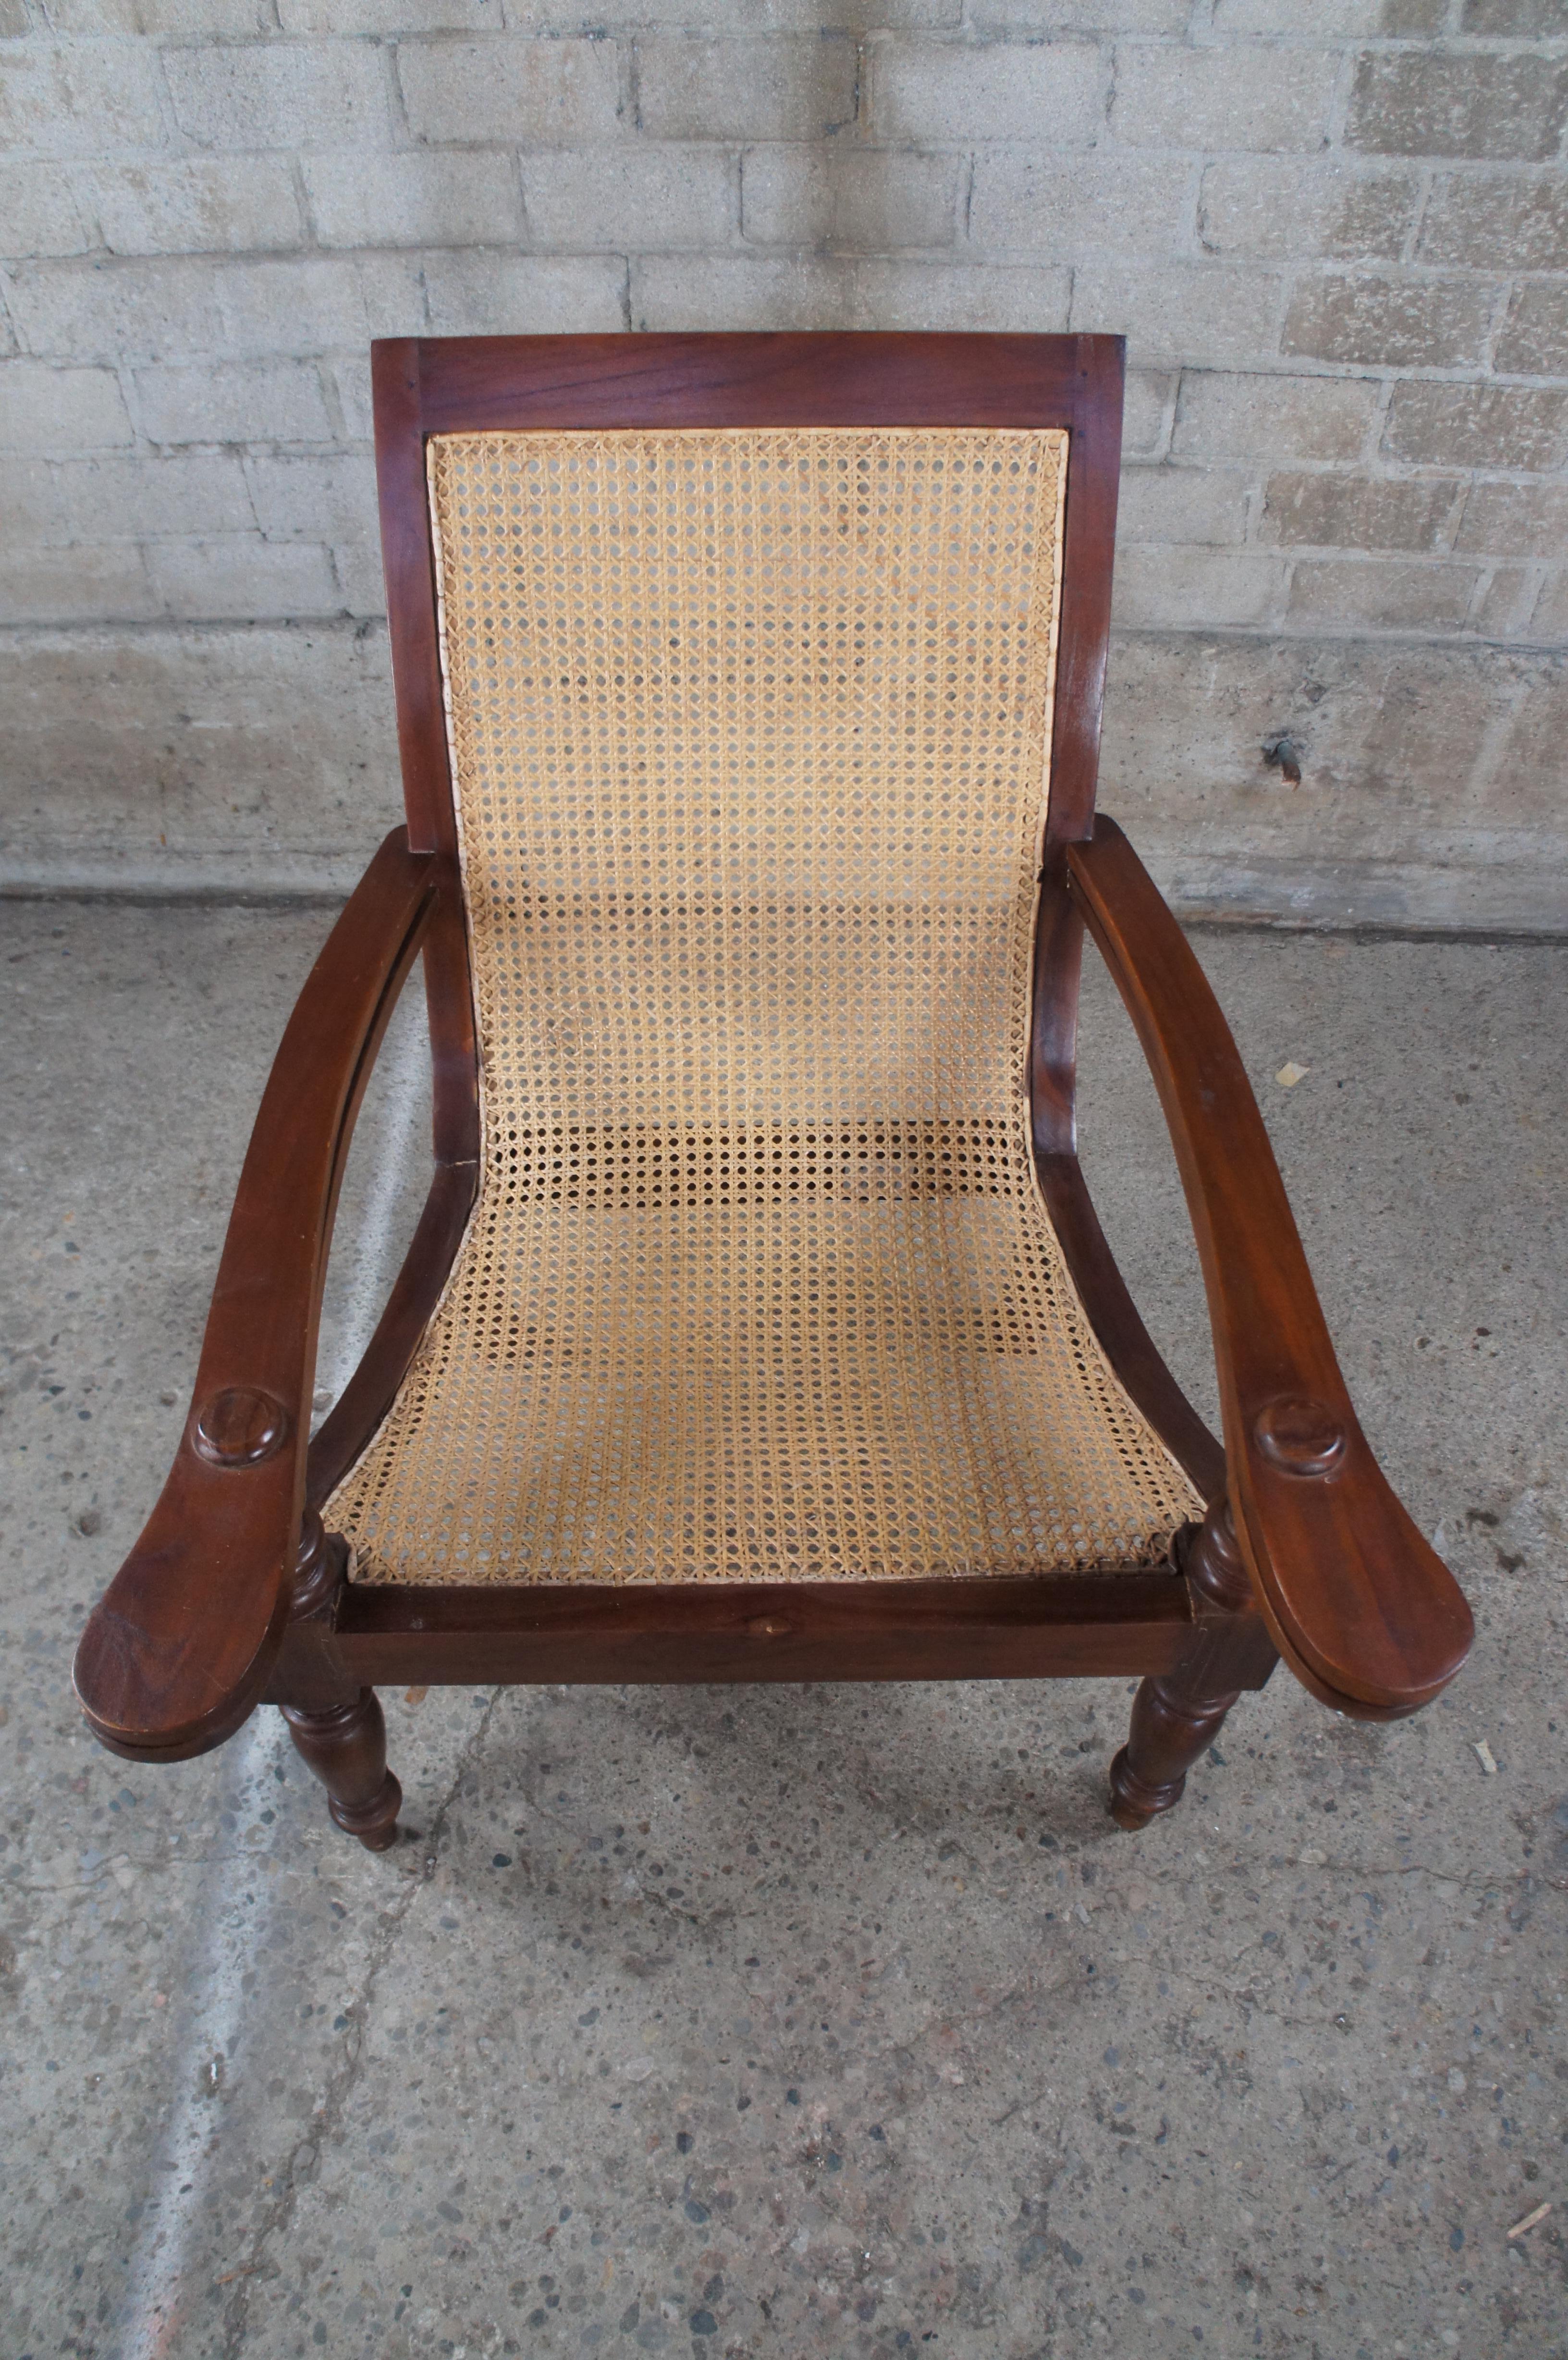 Upholstery Antique British Colonial Anglo Indian Teak Extendable Arm Caned Plantation Chair